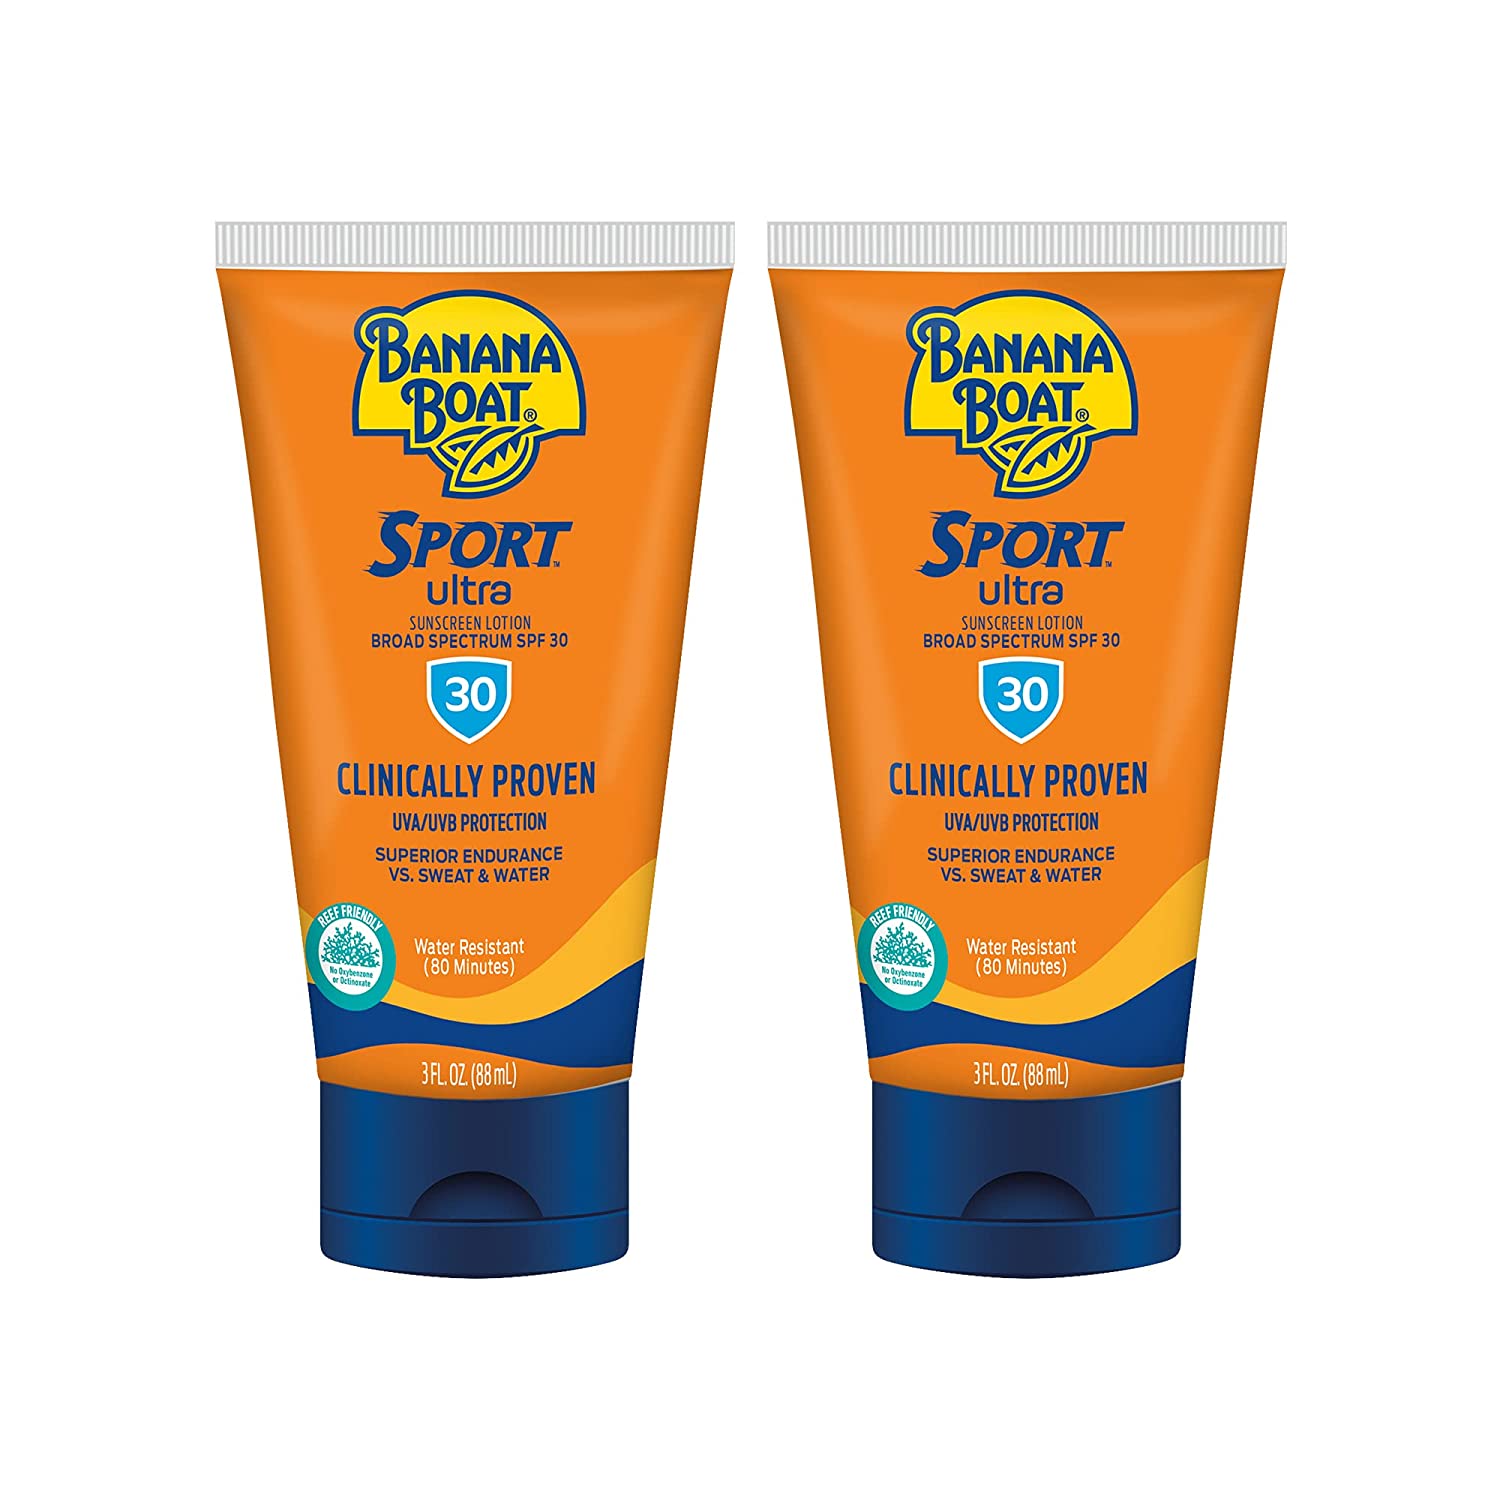 2-Pack 3-Oz Banana Boat Sport Ultra SPF 30 Sunscreen Lotion $4.18 w/ S&S + Free Shipping w/ Prime or Orders $25+